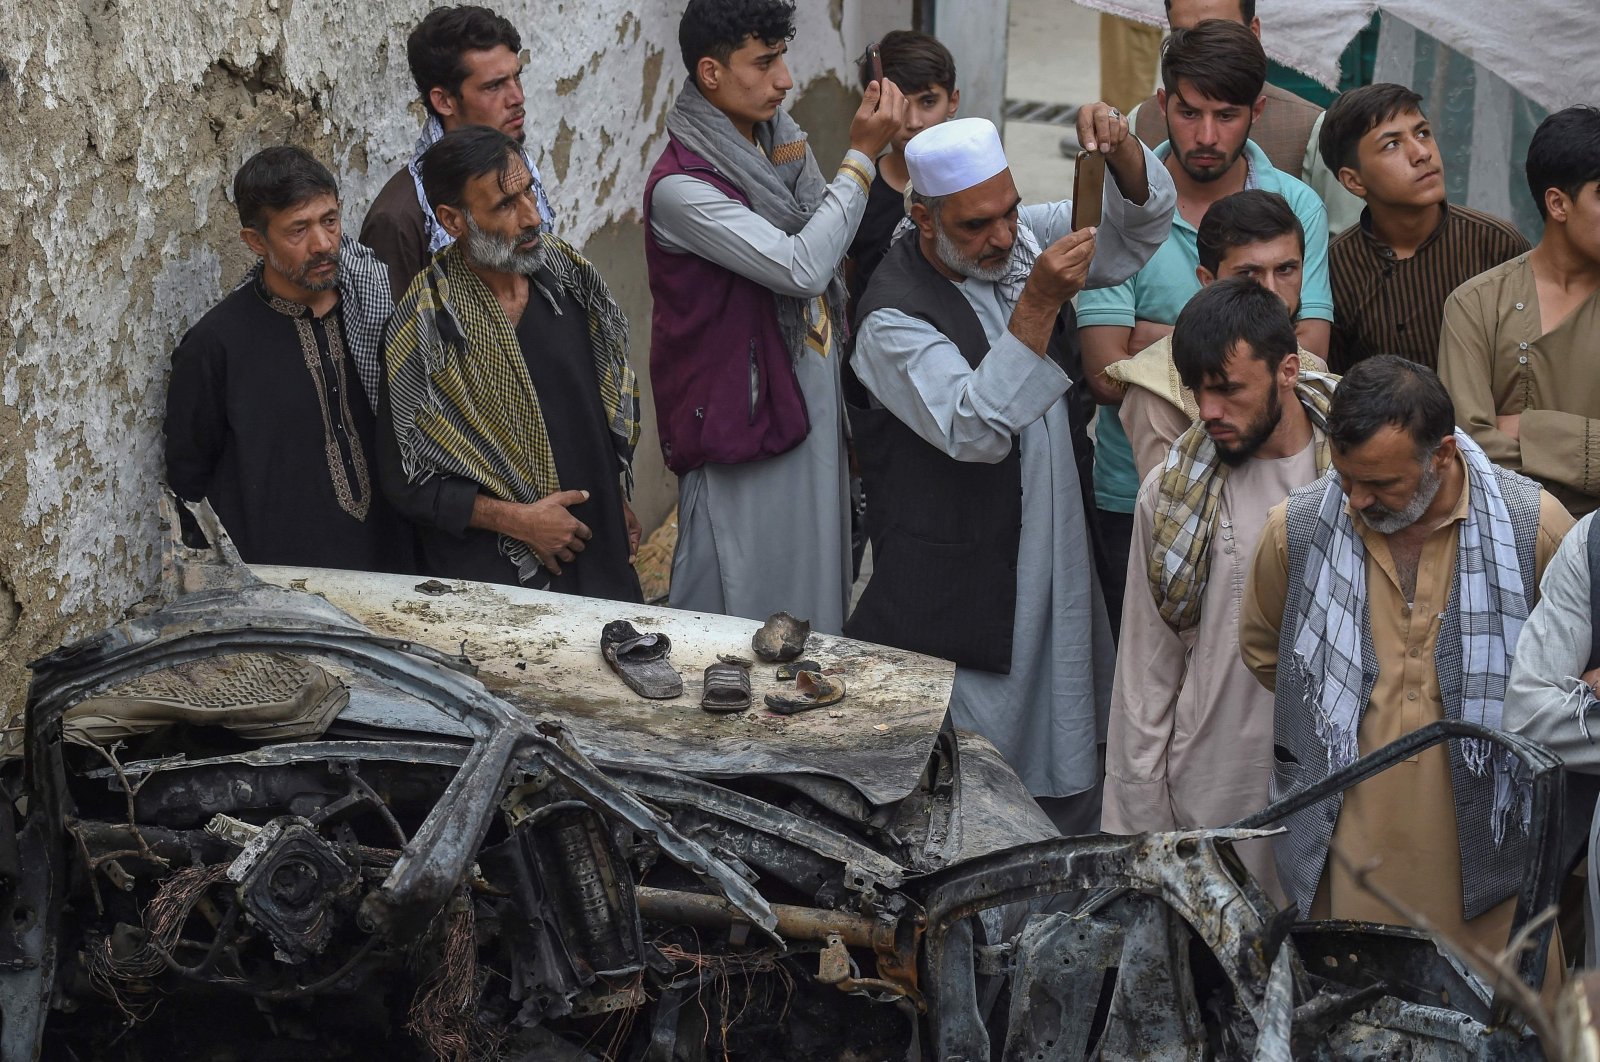 Afghan residents and family members of victims gather next to a damaged vehicle inside a house, the day after a U.S. drone airstrike in Kabul, Afghanistan, Aug. 30, 2021. (AFP Photo)